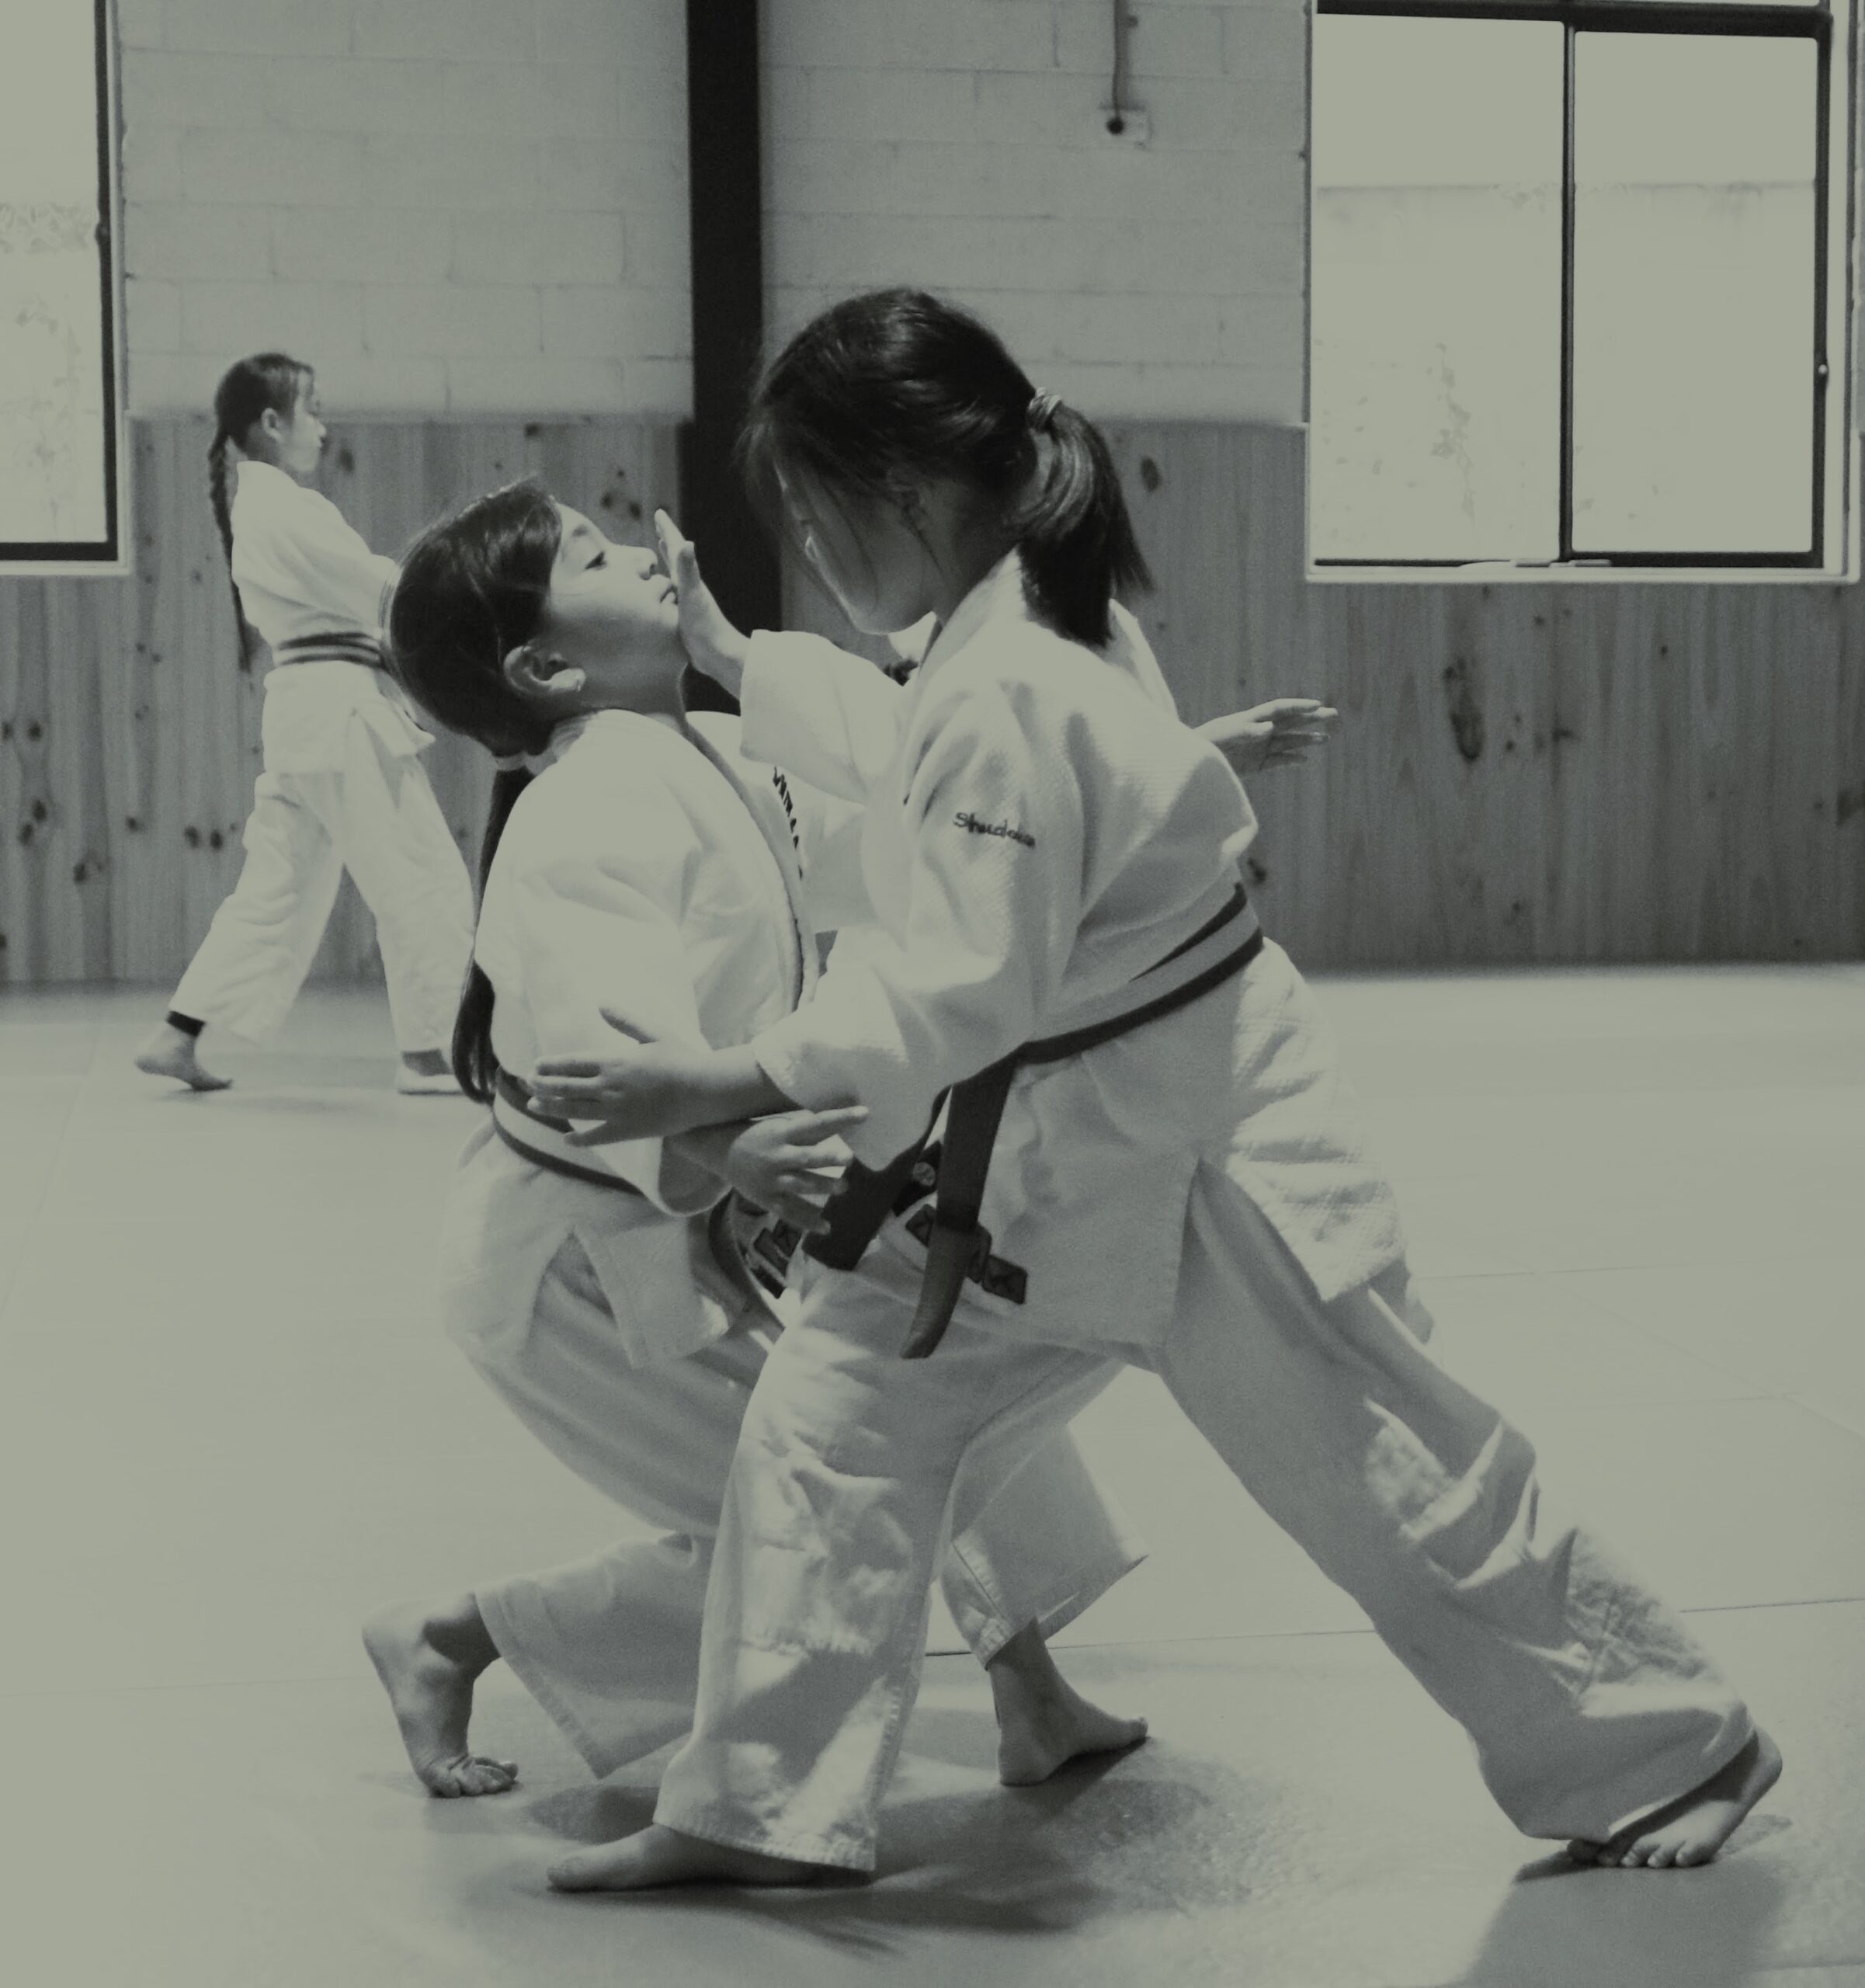 Aikido for Children: Benefits and Teaching Approaches